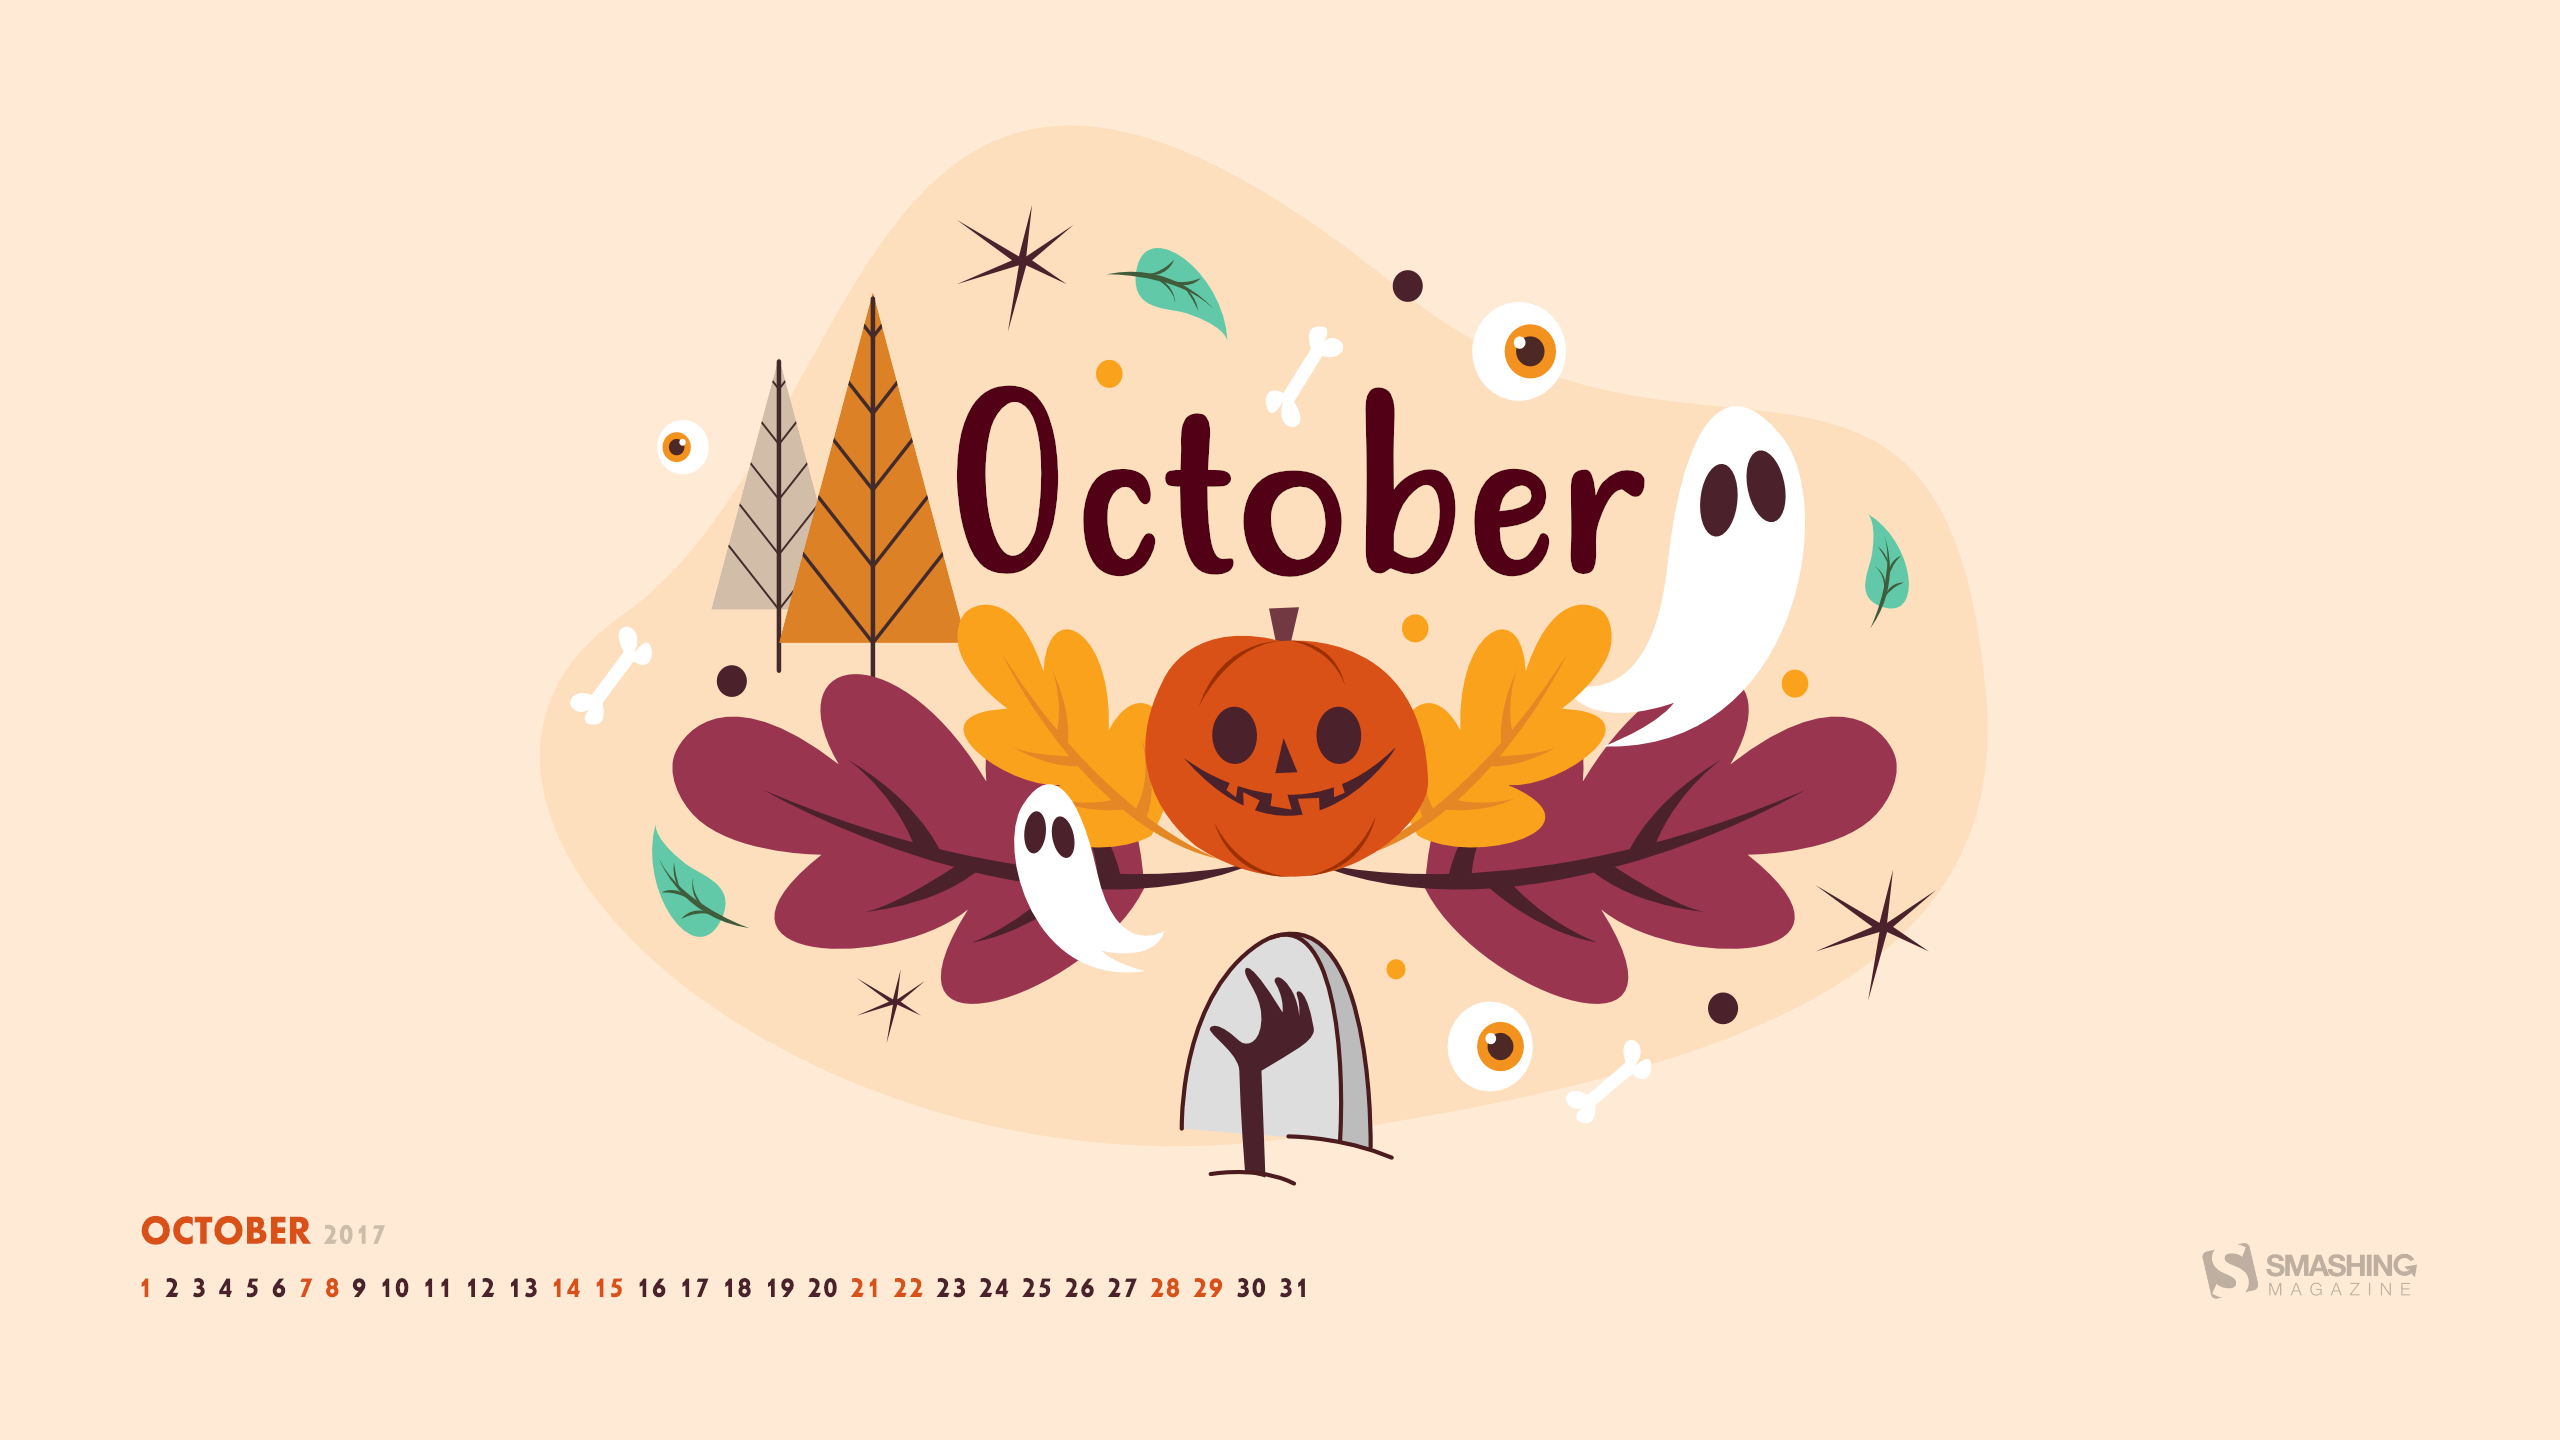 http://files.smashingmagazine.com/wallpapers/oct-17/hello-autumn-im-glad-to-see-you-again/cal/oct-17-hello-autumn-im-glad-to-see-you-again-cal-2560x1440.jpg